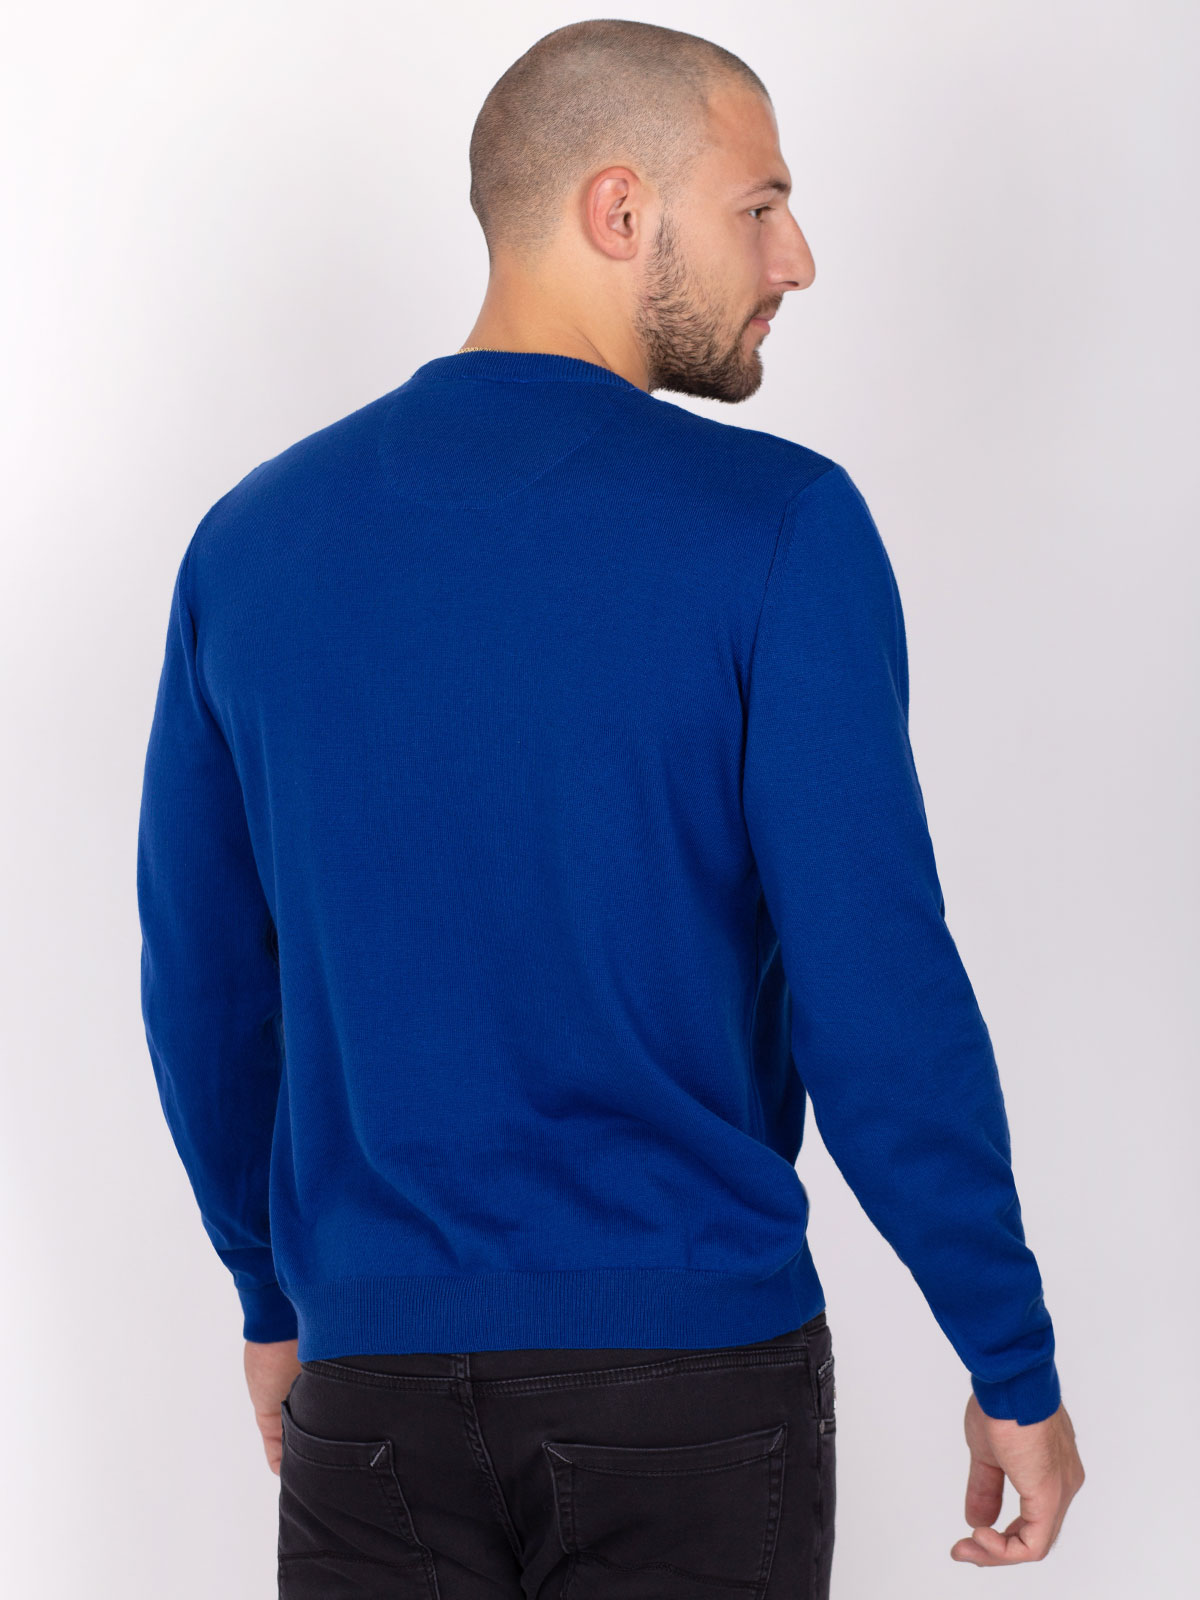 Sweater in parliament blue color - 35300 € 21.93 img3